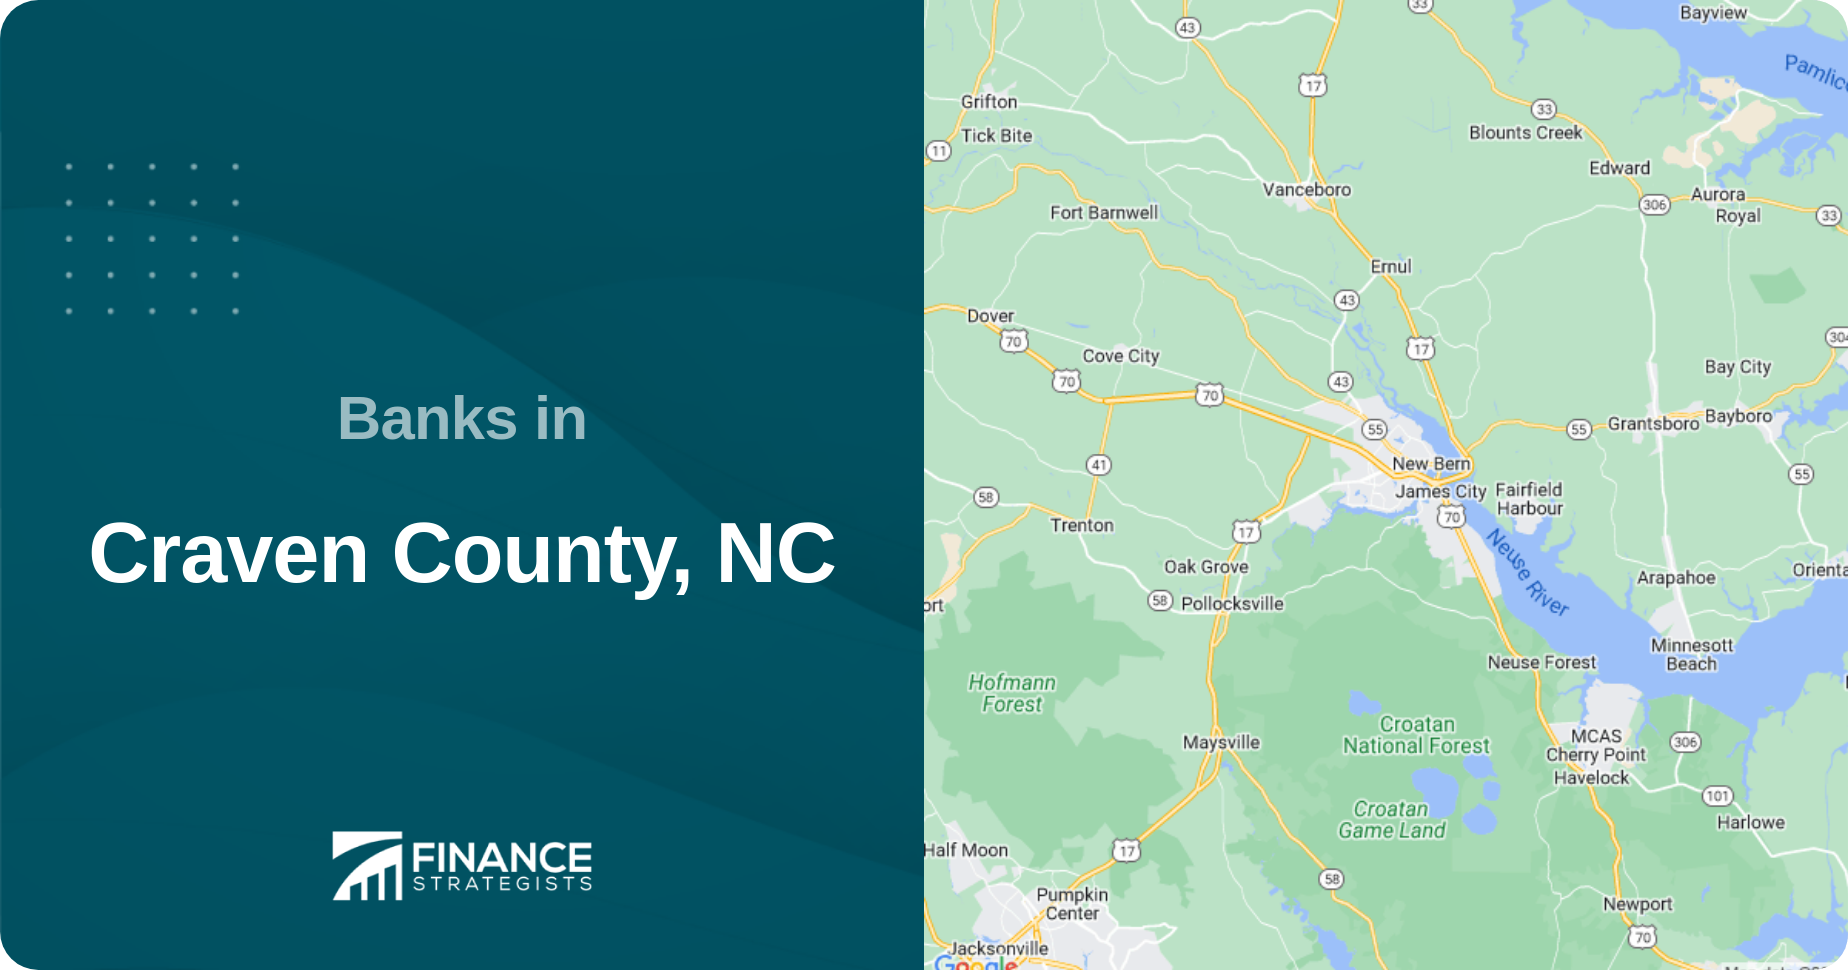 Banks in Craven County, NC